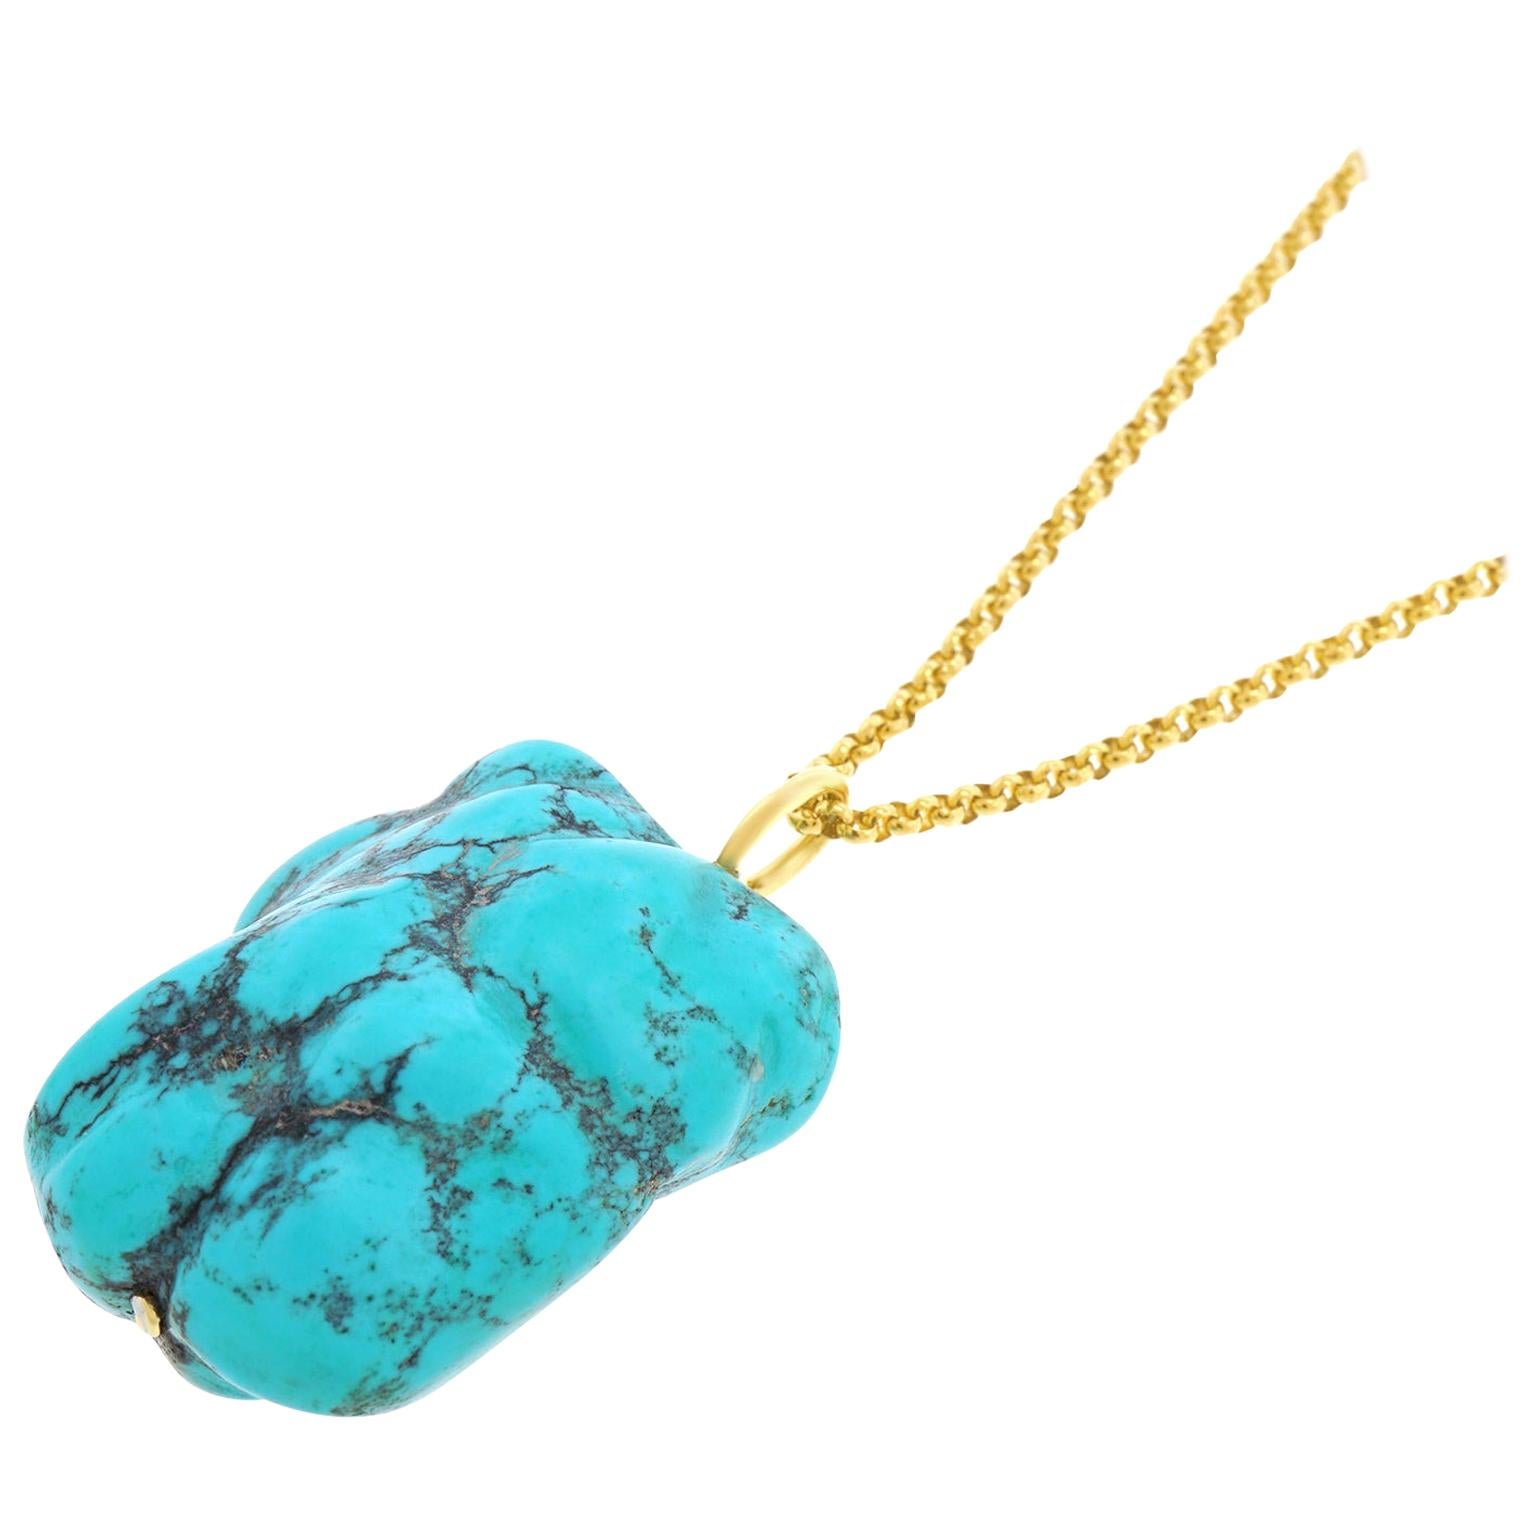 Large Natural Turquoise Pendant